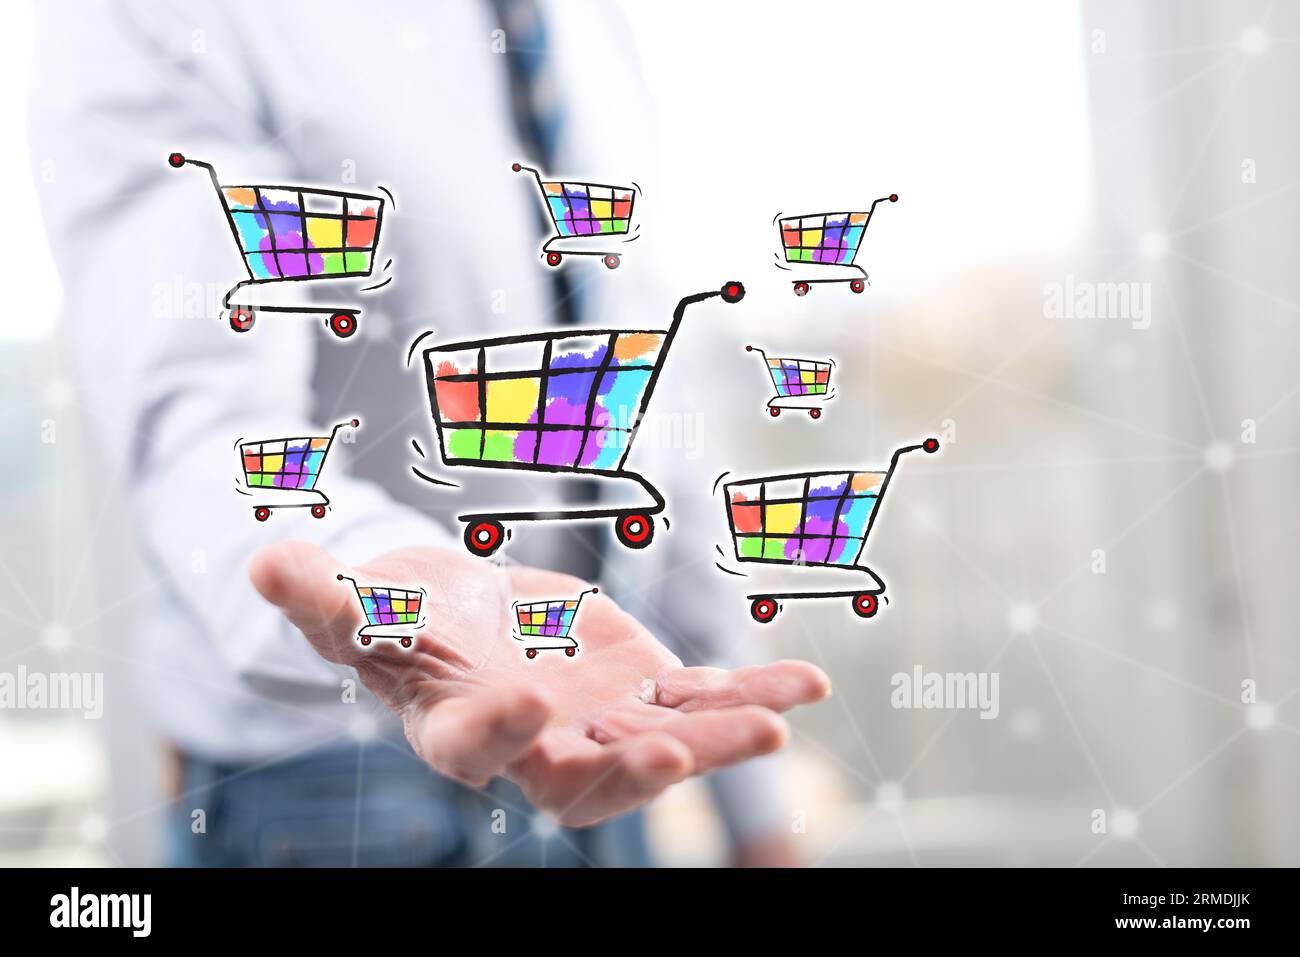 Shopping concept above the hand of a man in background Stock Photo